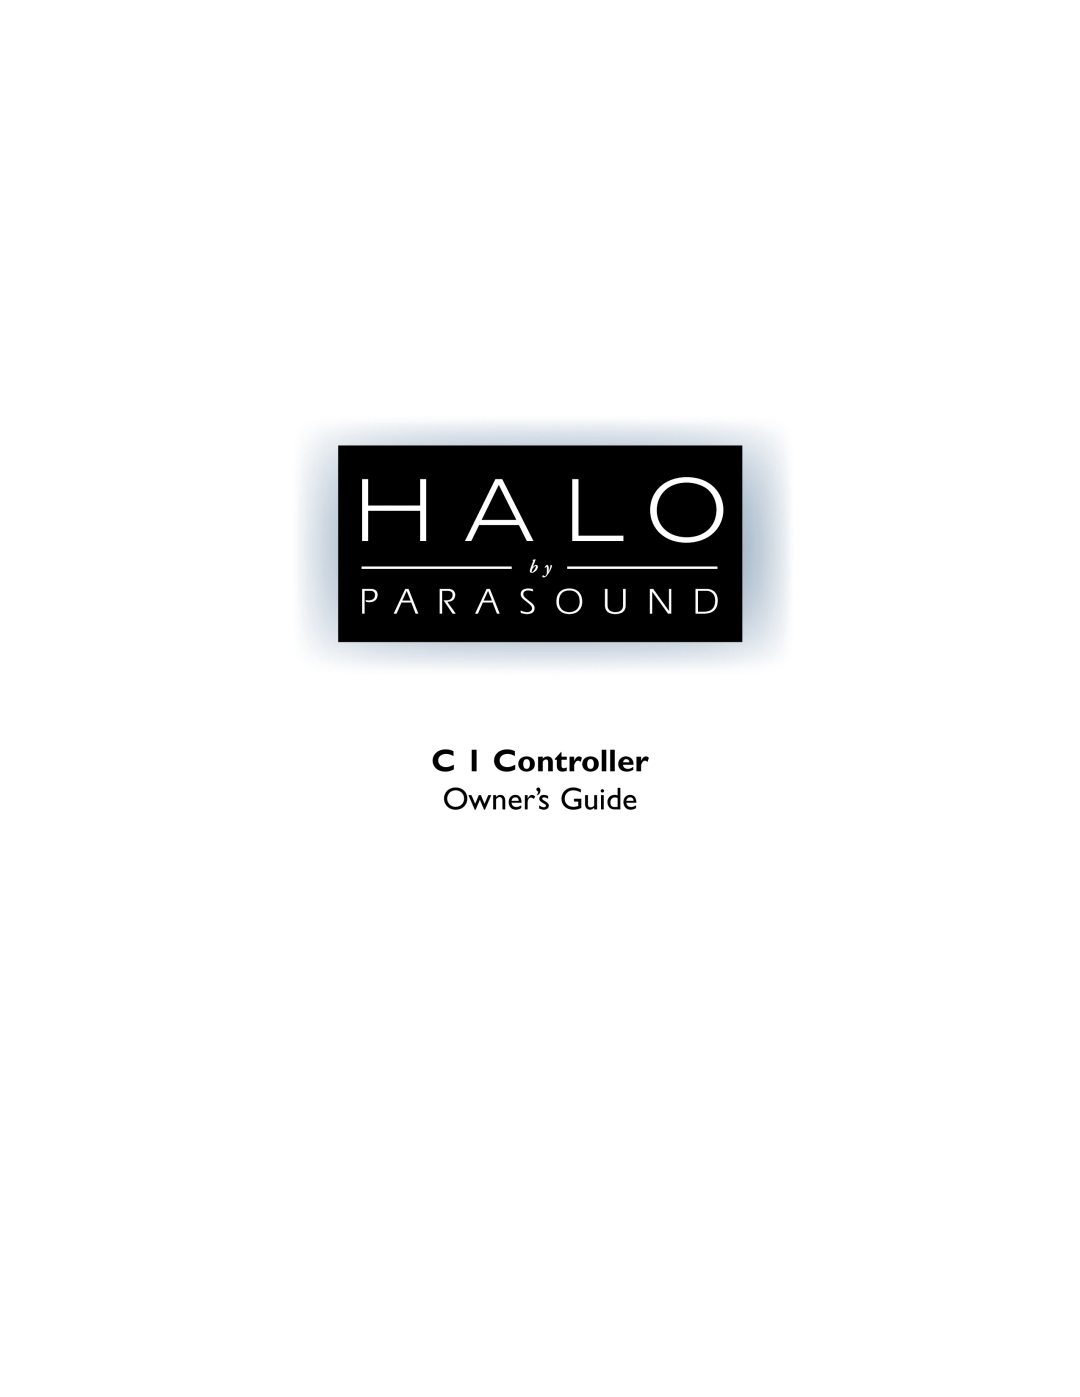 Parasound Halo C1 Controller manual C 1 Controller, Owner’s Guide 